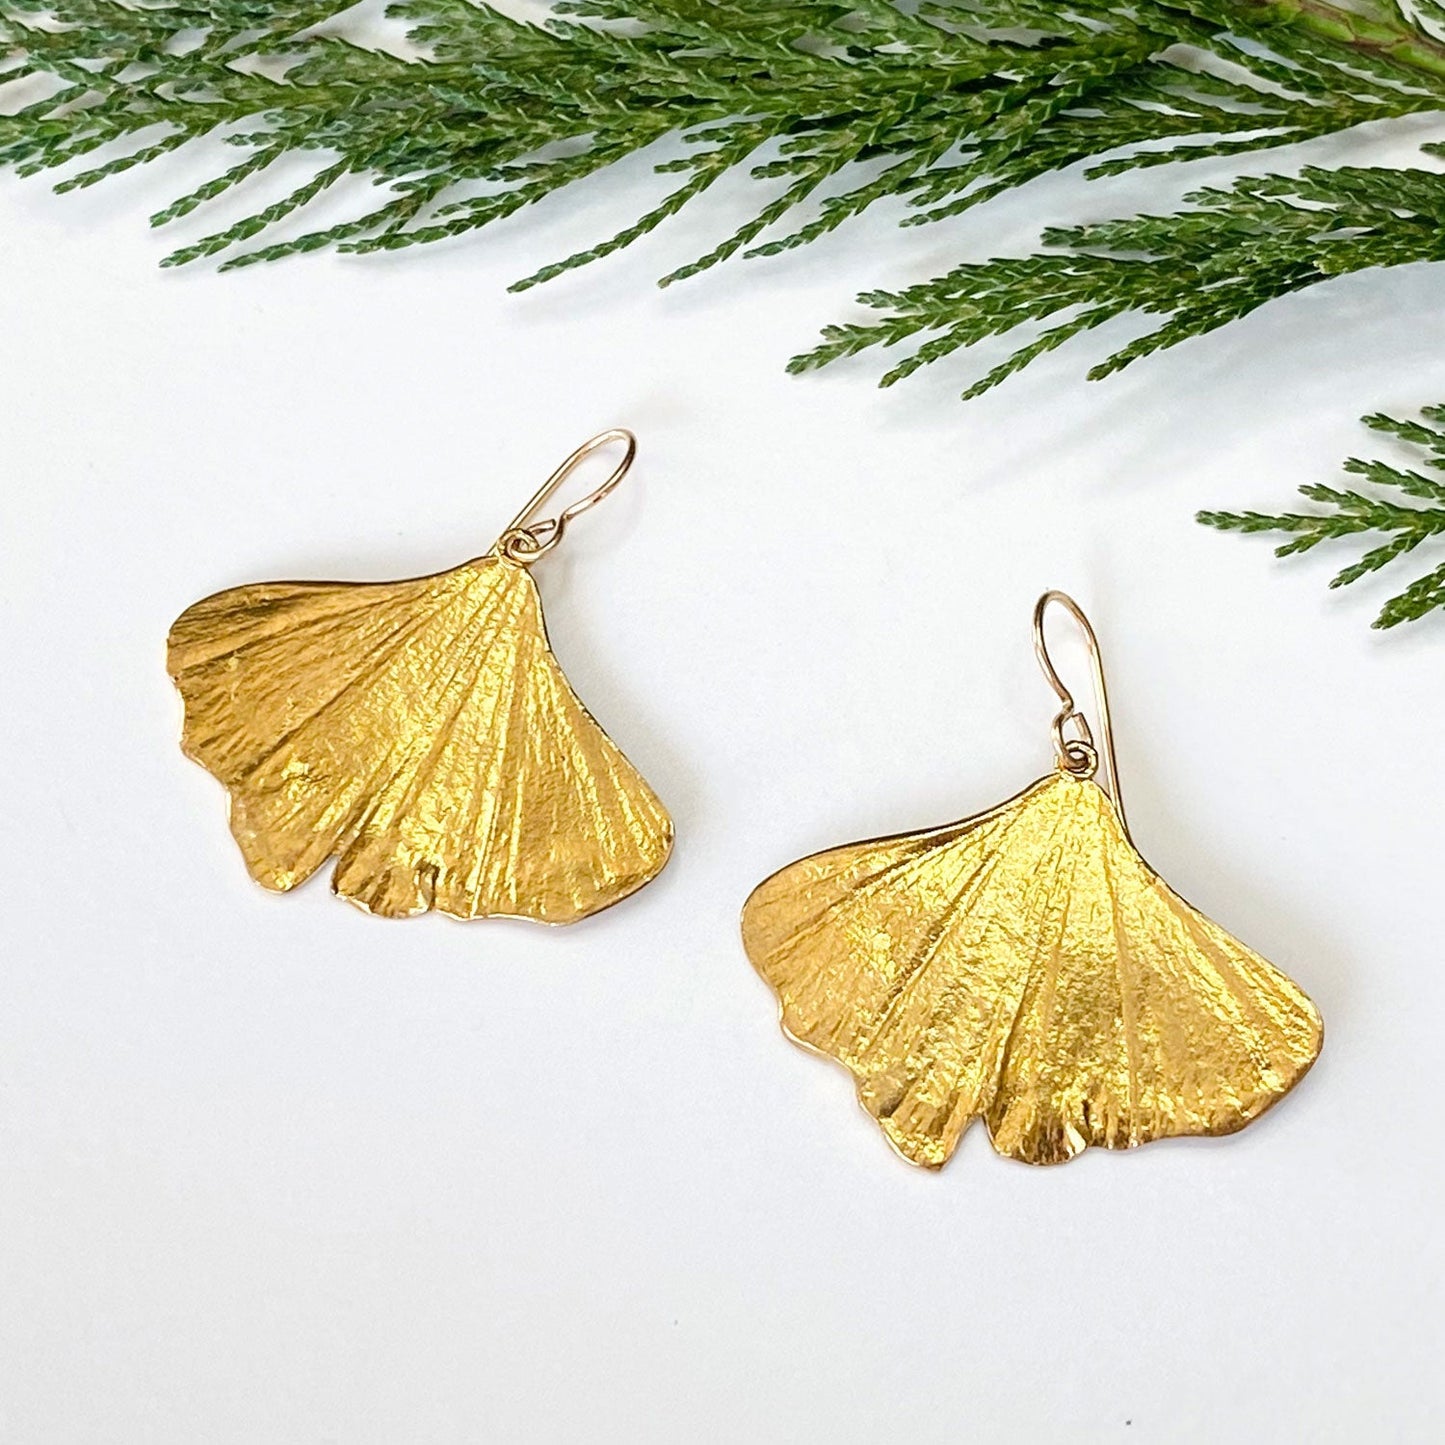 beautiful pair of golden ginkgo earrings on a white background with cedar boughs 